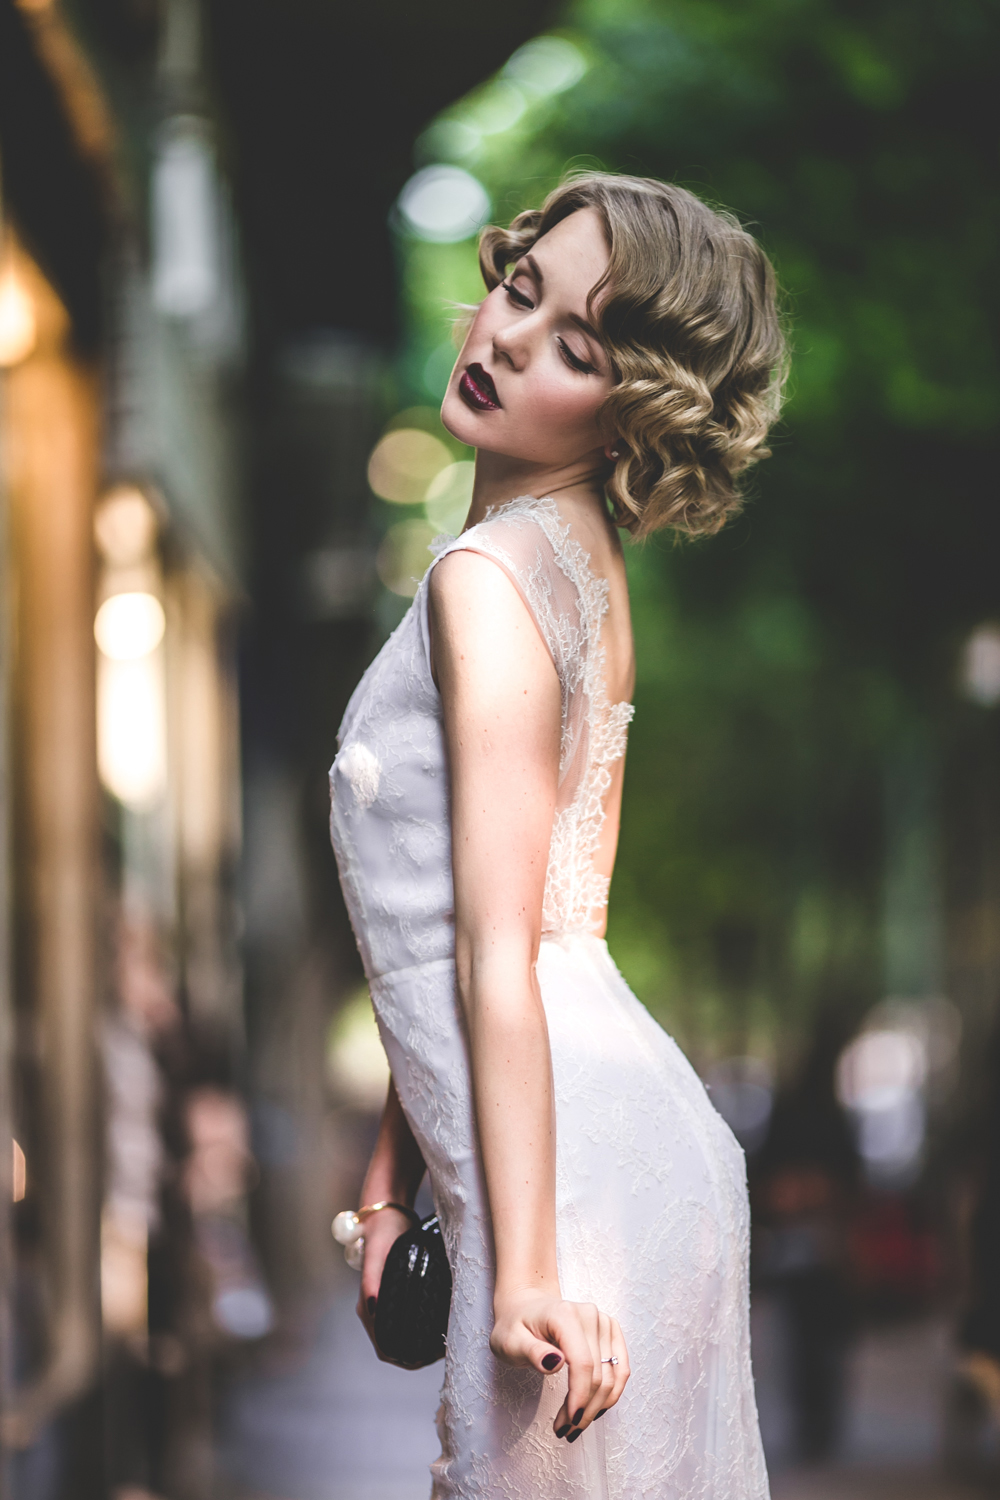 darya kamalova fashion blogger from thecablook in trip in Barcelona Spain with Pronovias 2015 wedding dresses collection catwalk wearing uel camilo white gown bottega veneta knot clutch and black lips-1802